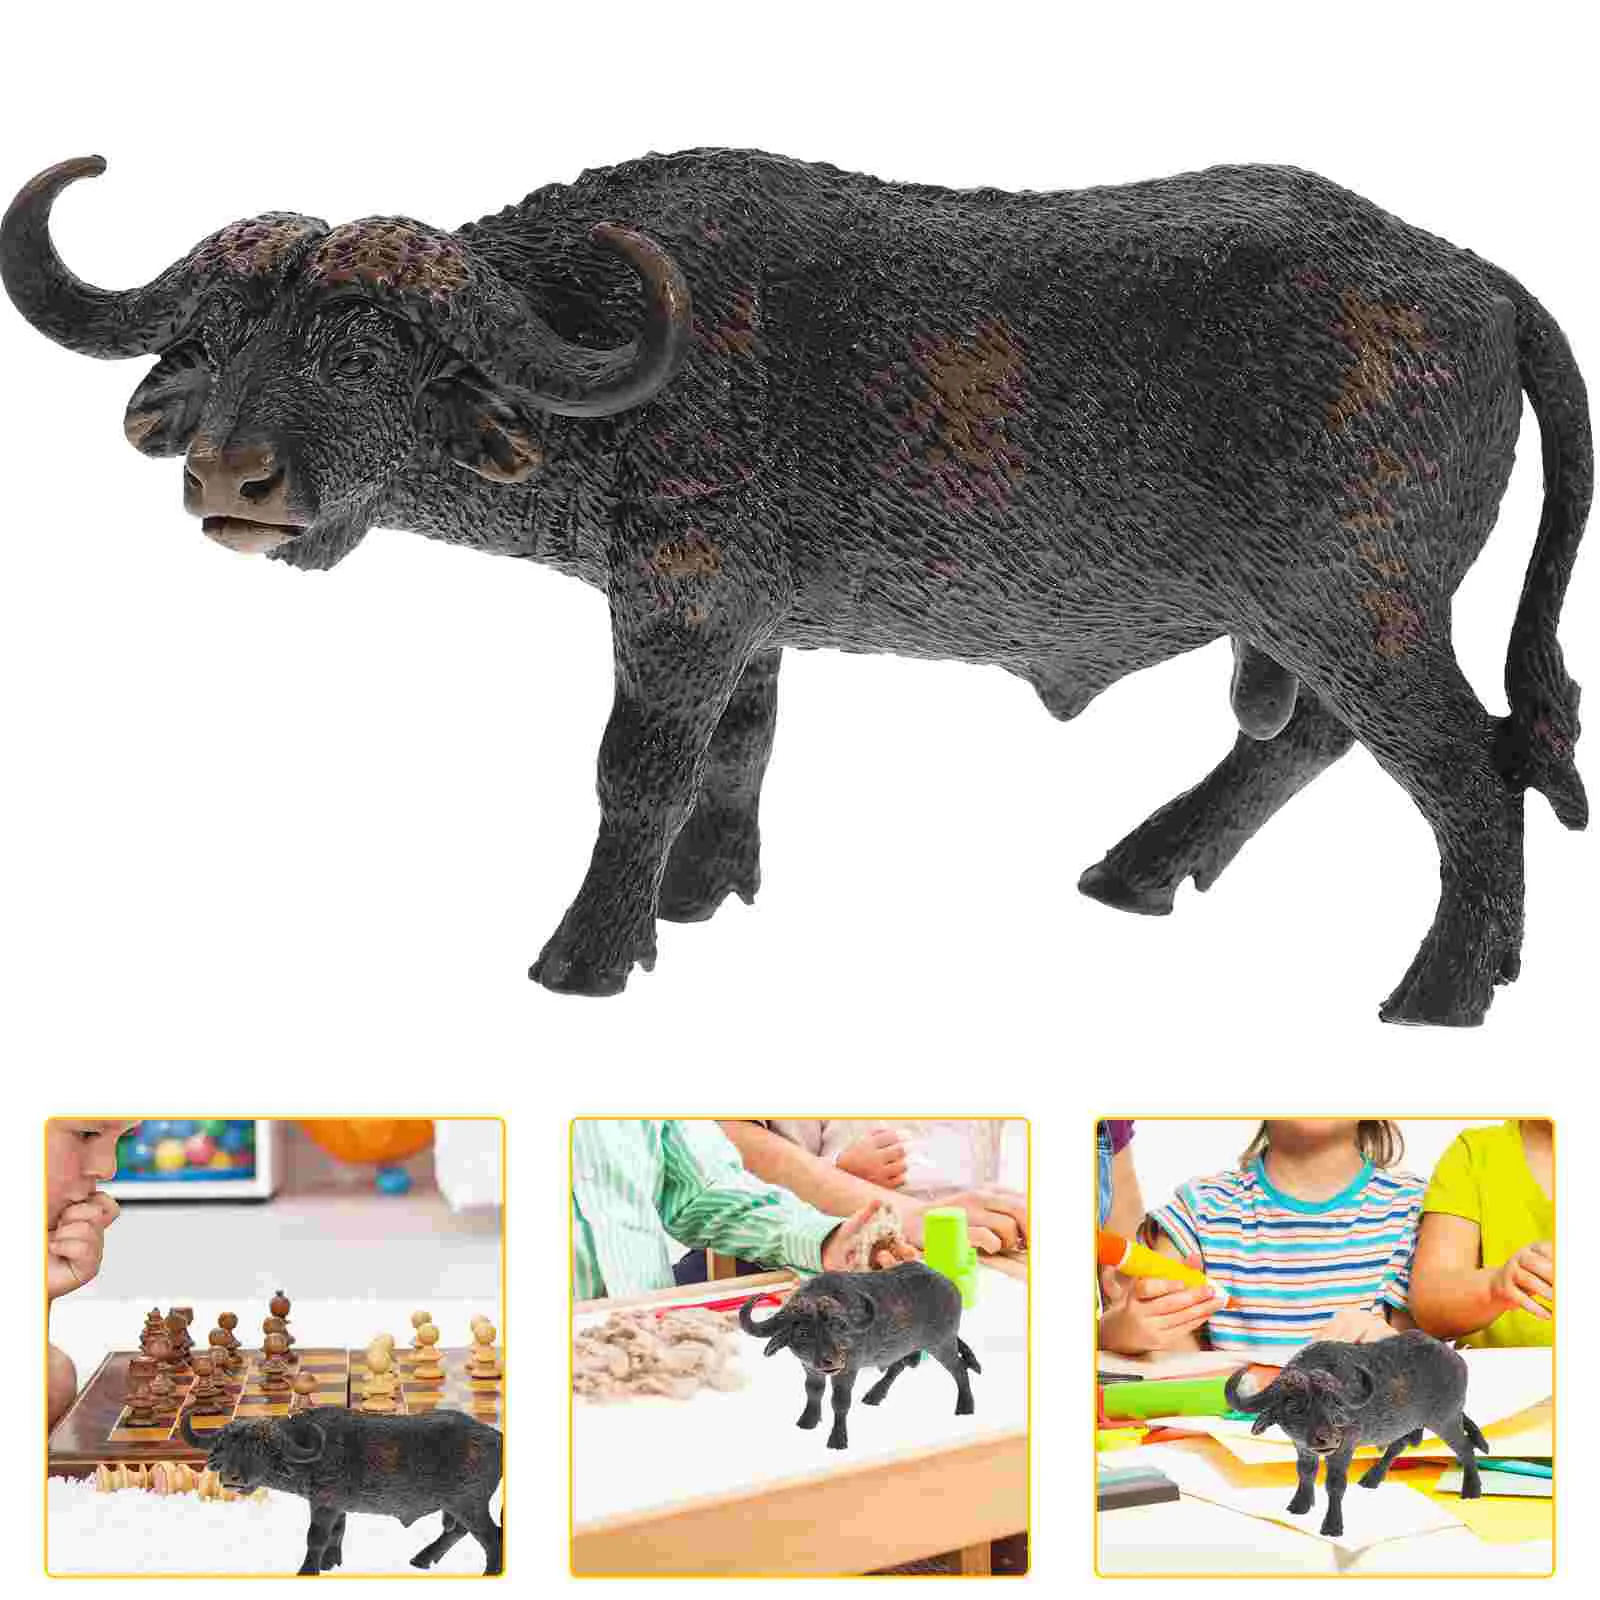 

Buffalo Model Toy Figurines Childrens Toys Animal Kids Simulation Ornament Accessories